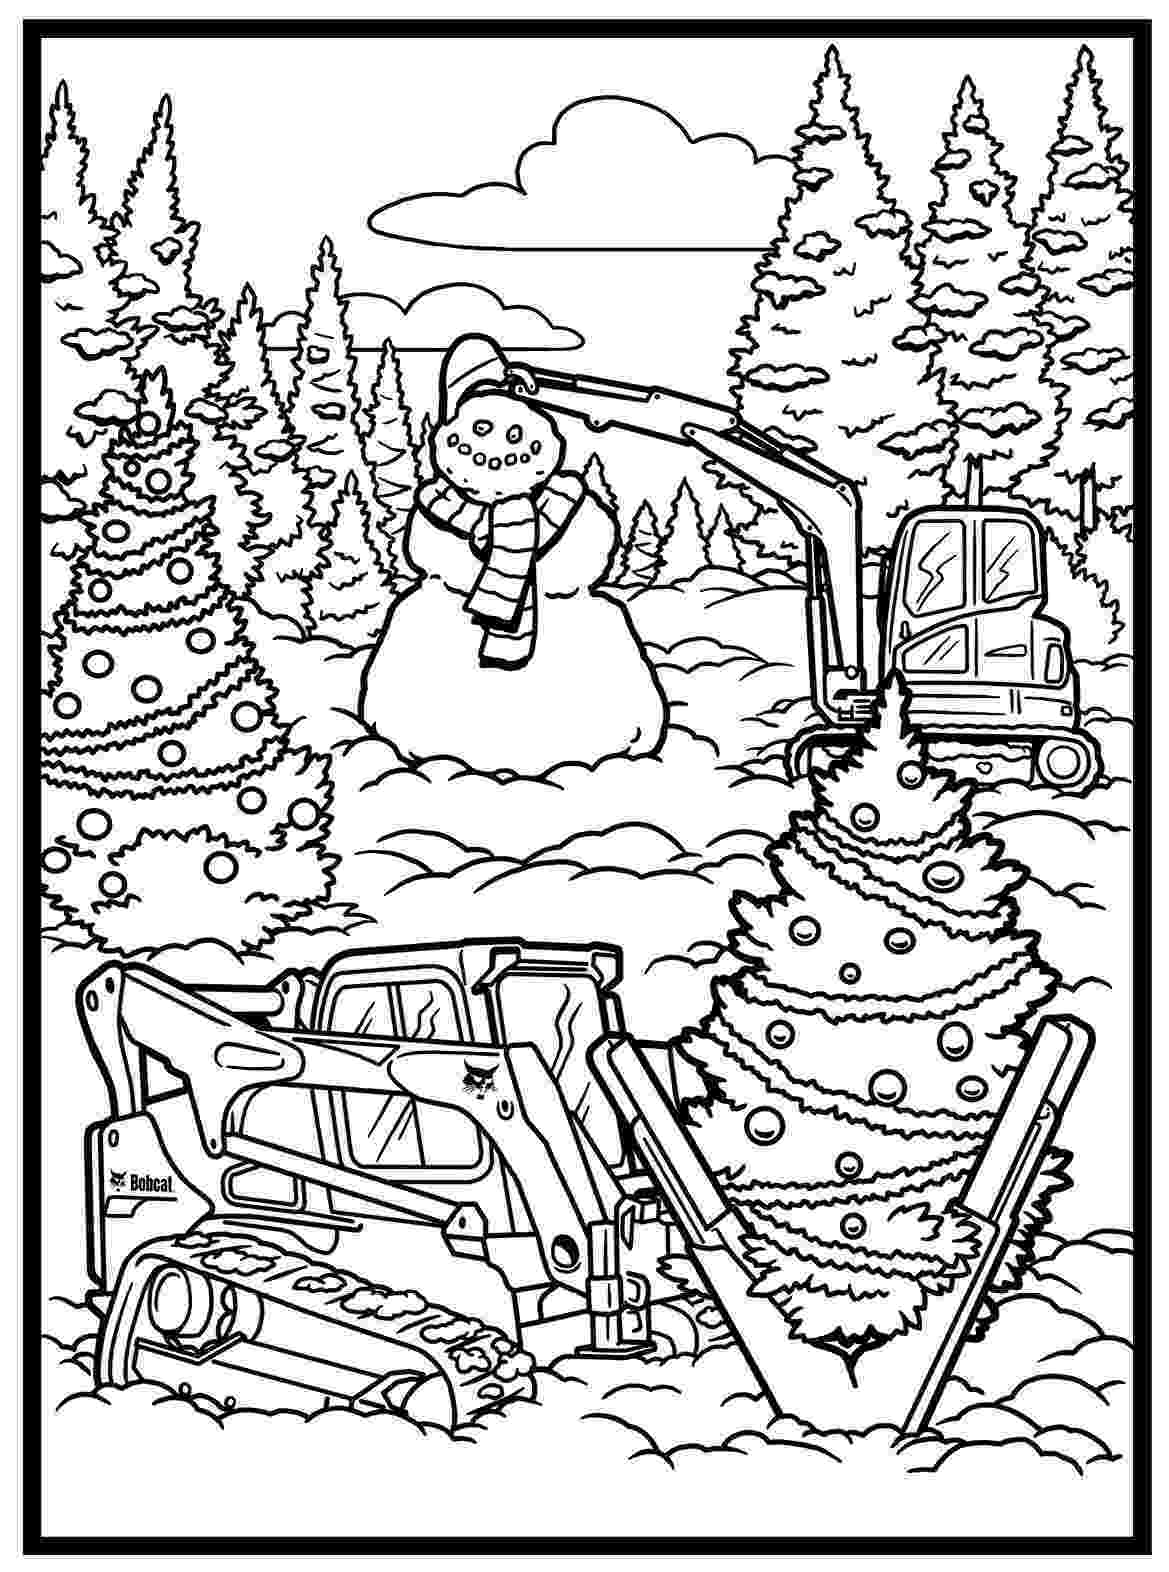 bobcat coloring pictures bobcat coloring pages to download and print for free bobcat coloring pictures 